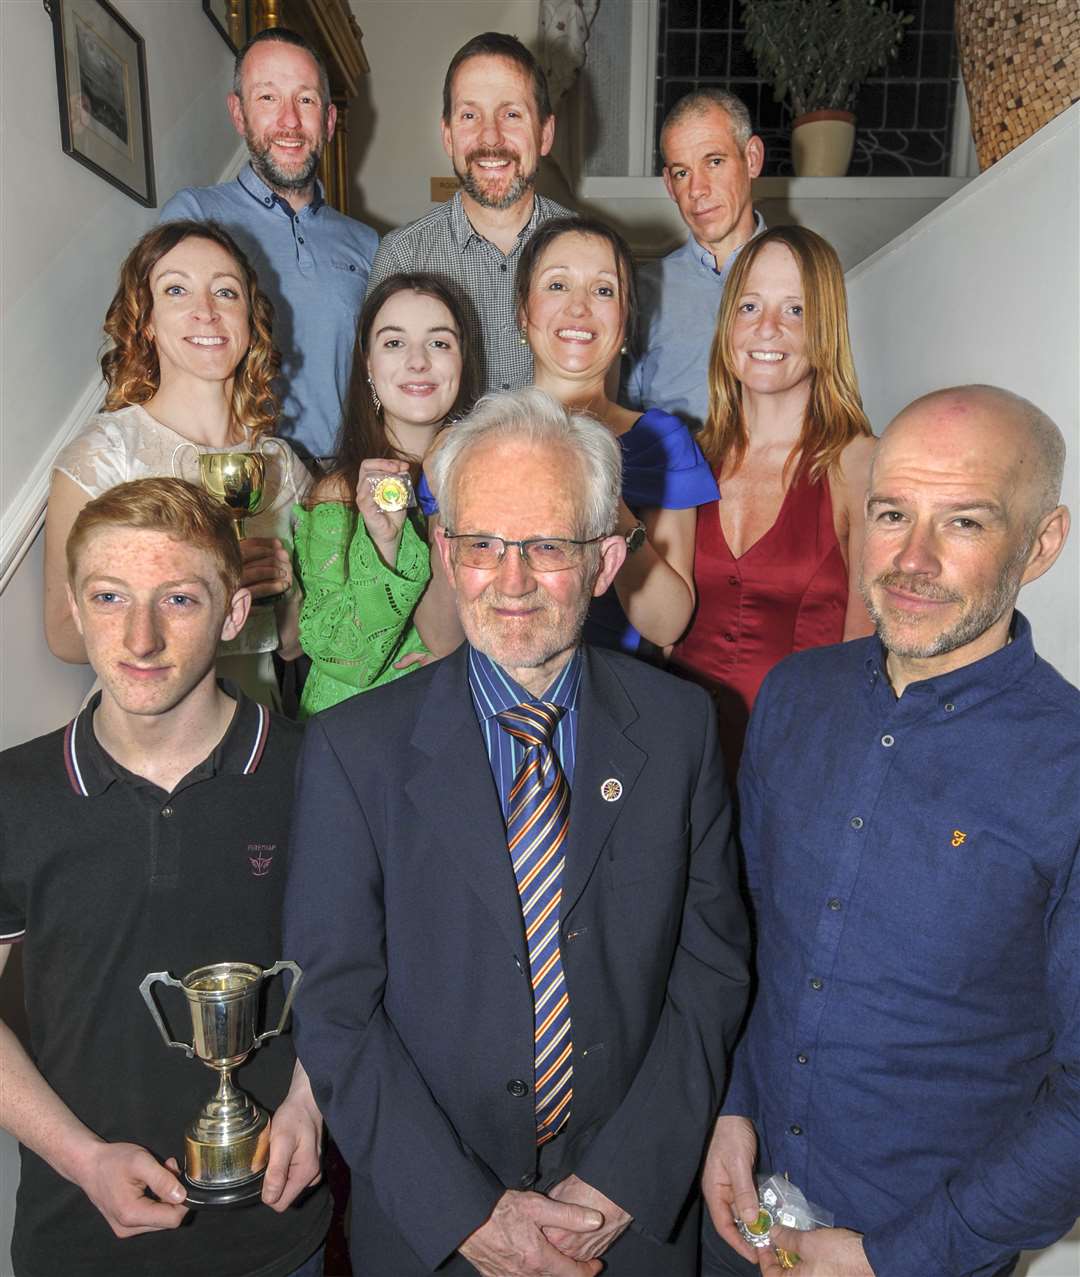 Caithness Cycling Club prize-winners at the annual dinner and presentation. Lorna Stanger, who presented the awards, is on the right-hand side, second row.